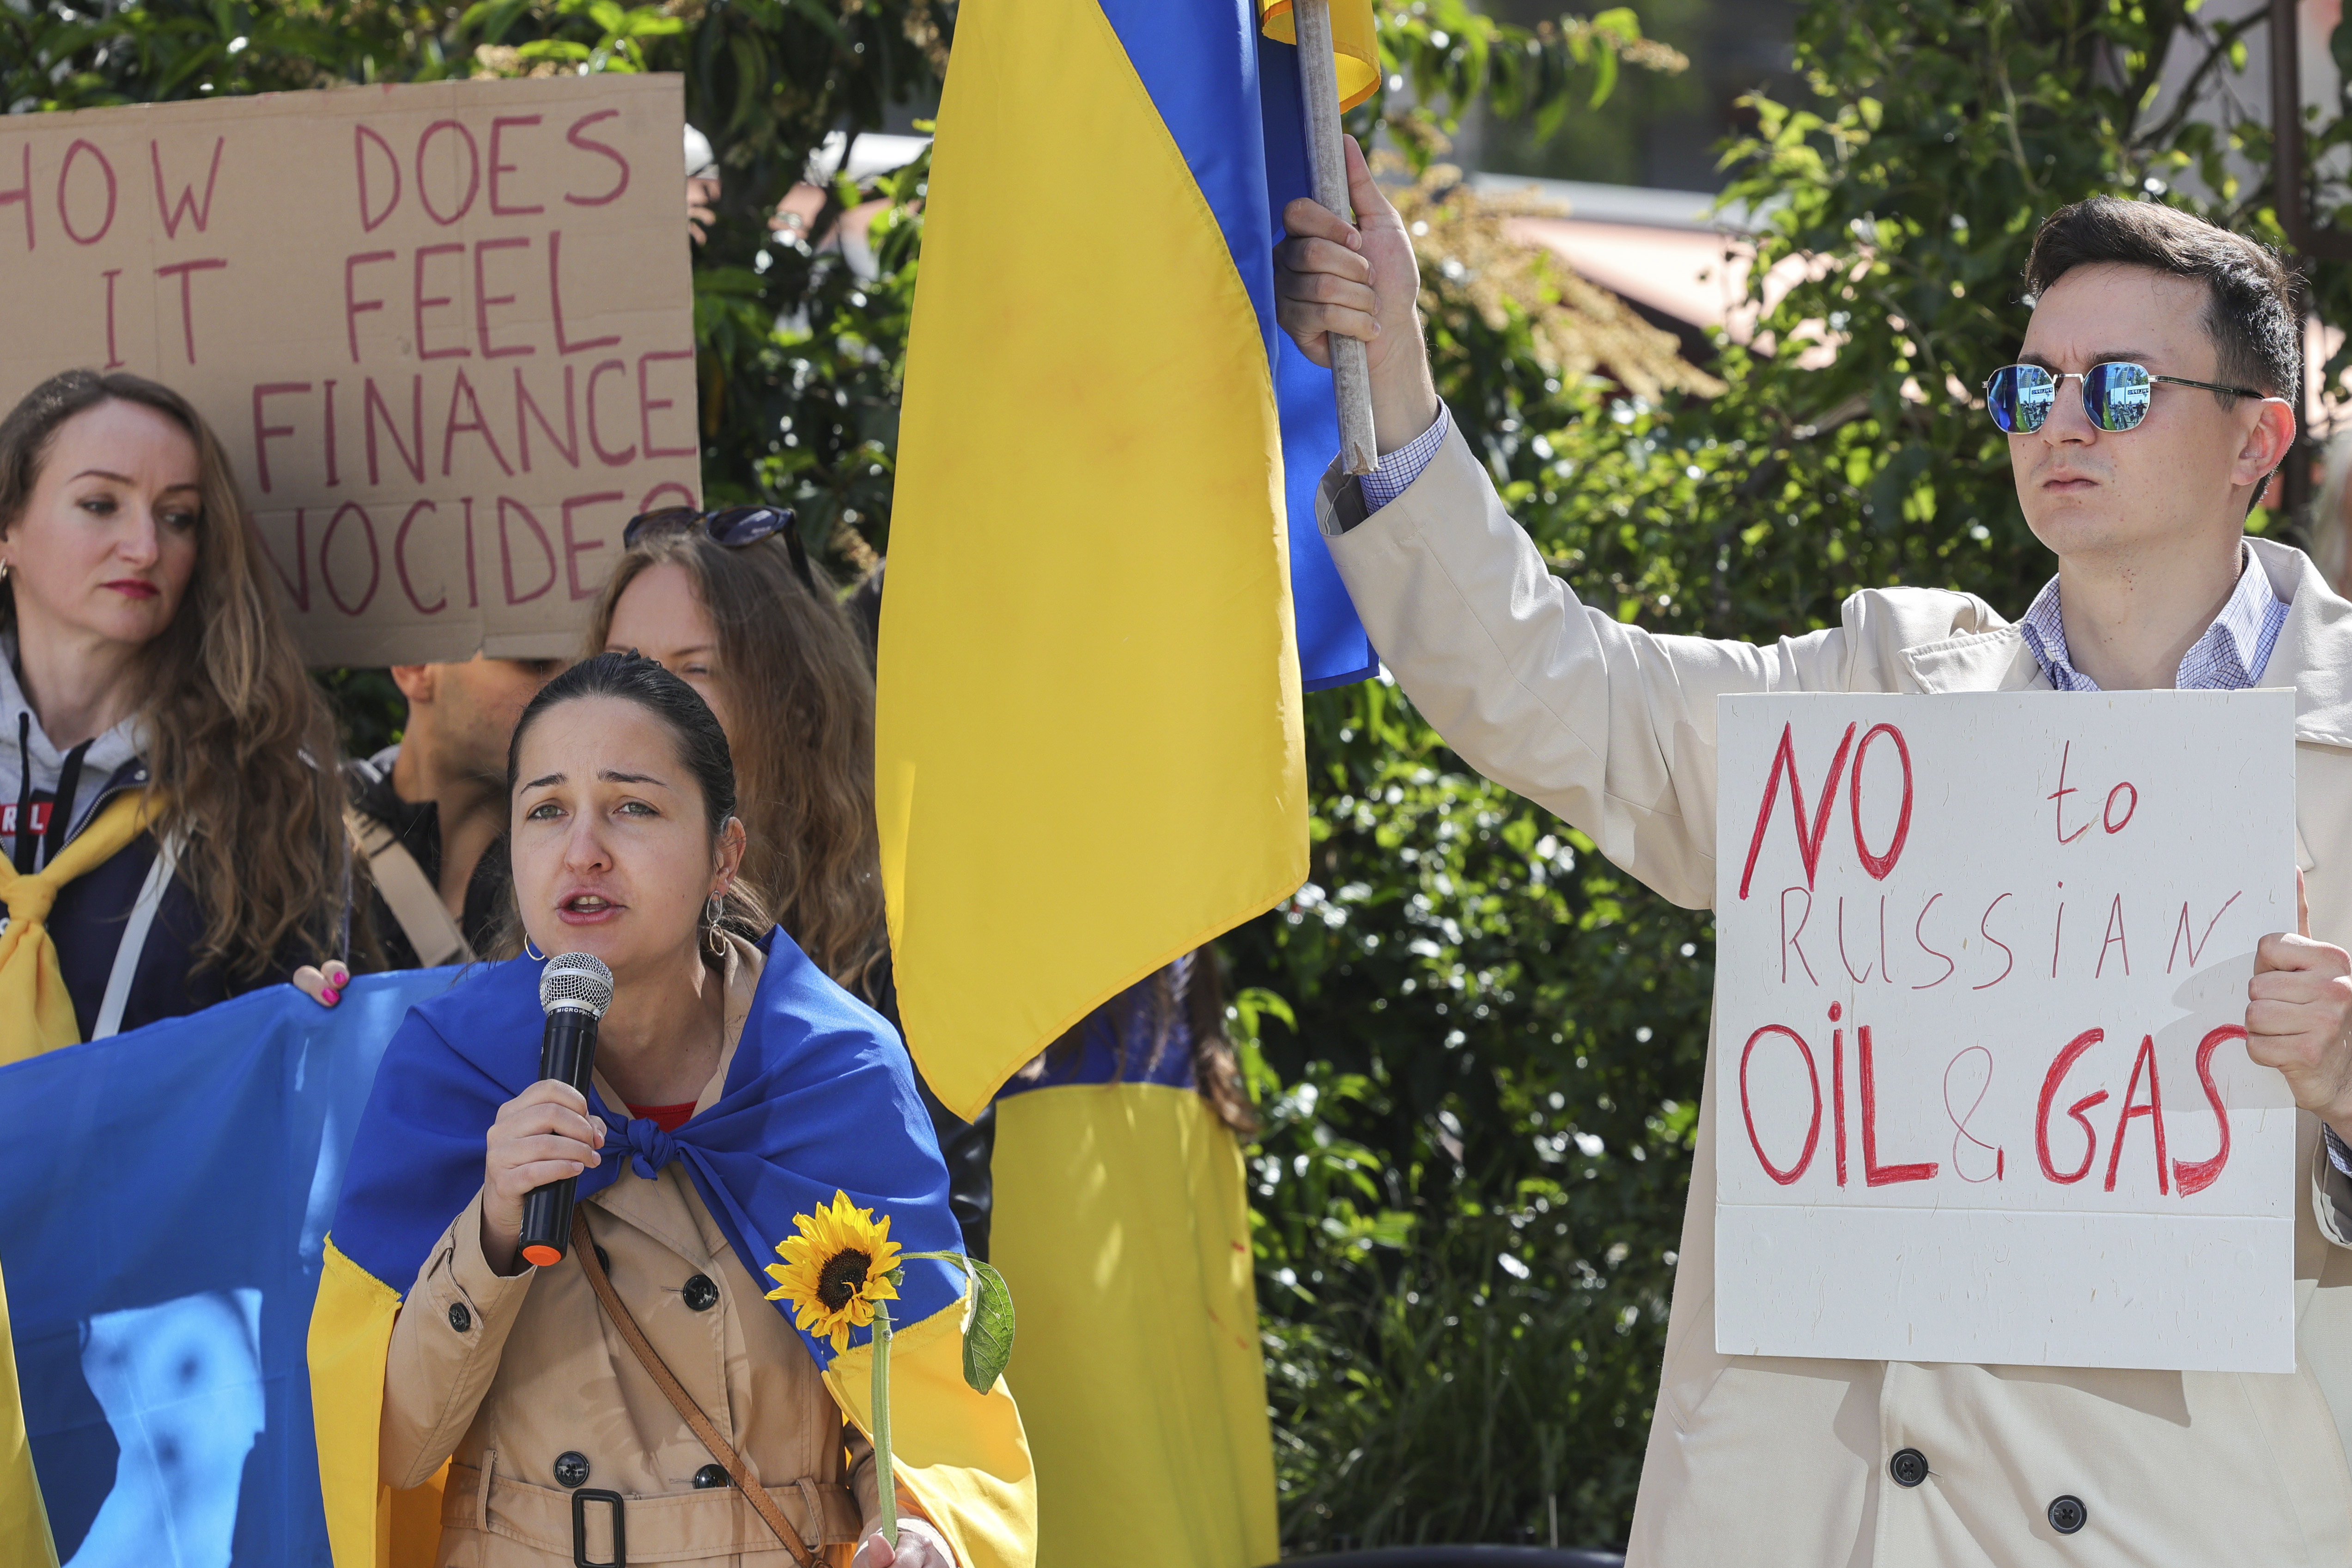 Ukrainian demonstrators demand an embargo on Russian oil during a protest in front of EU institutions prior to an extraordinary meeting of EU leaders to discuss Ukraine, energy and food security at the Europa building in Brussels, Monday, May 30, 2022